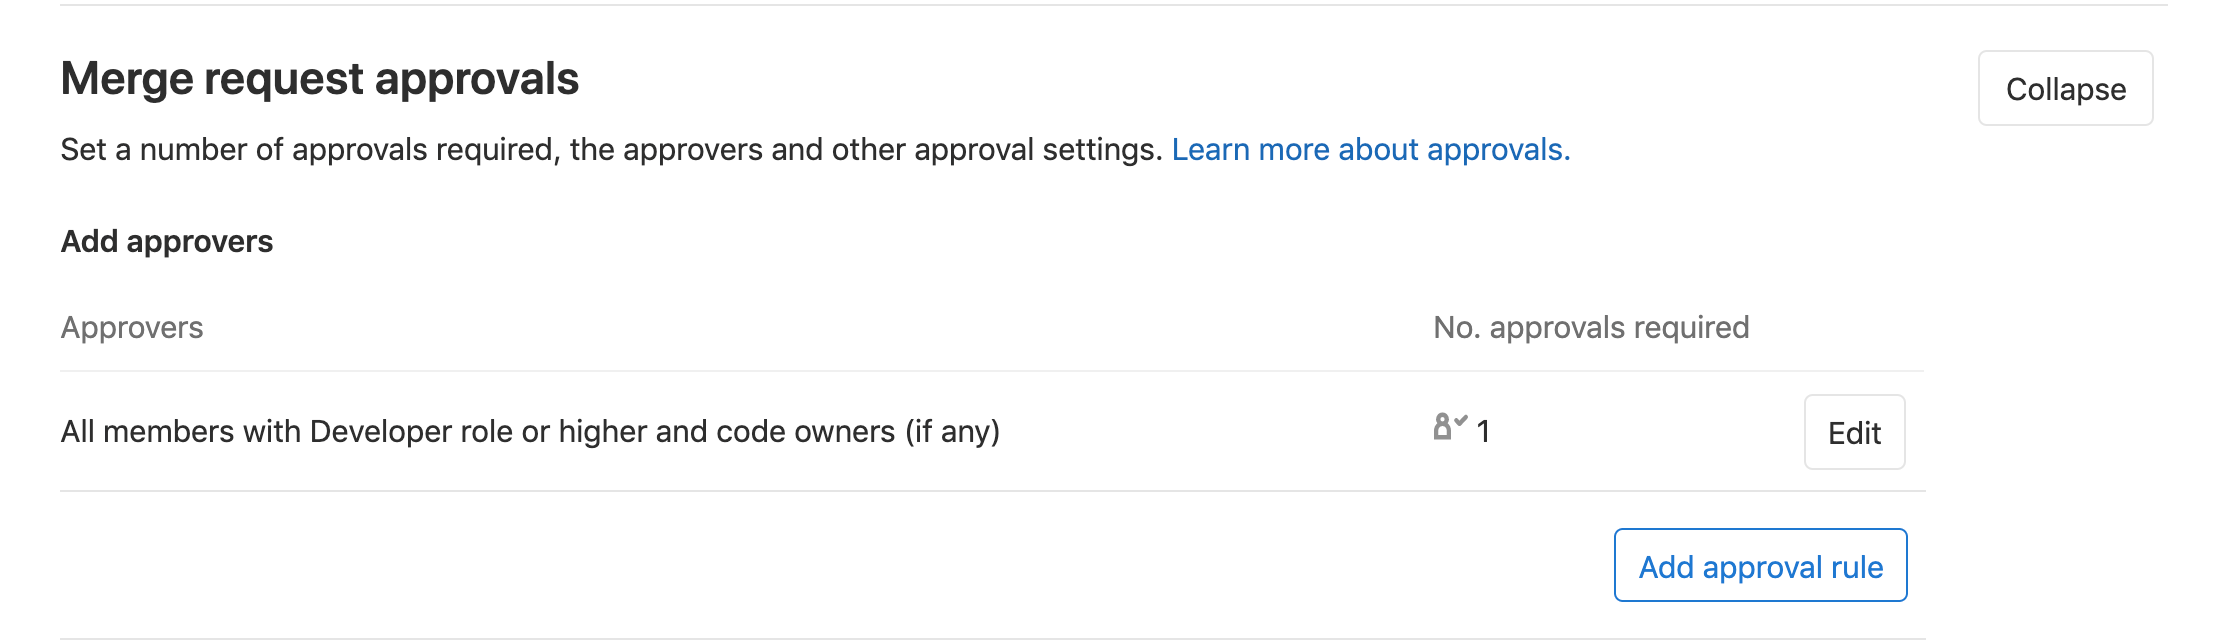 MR approvals by Code Owners